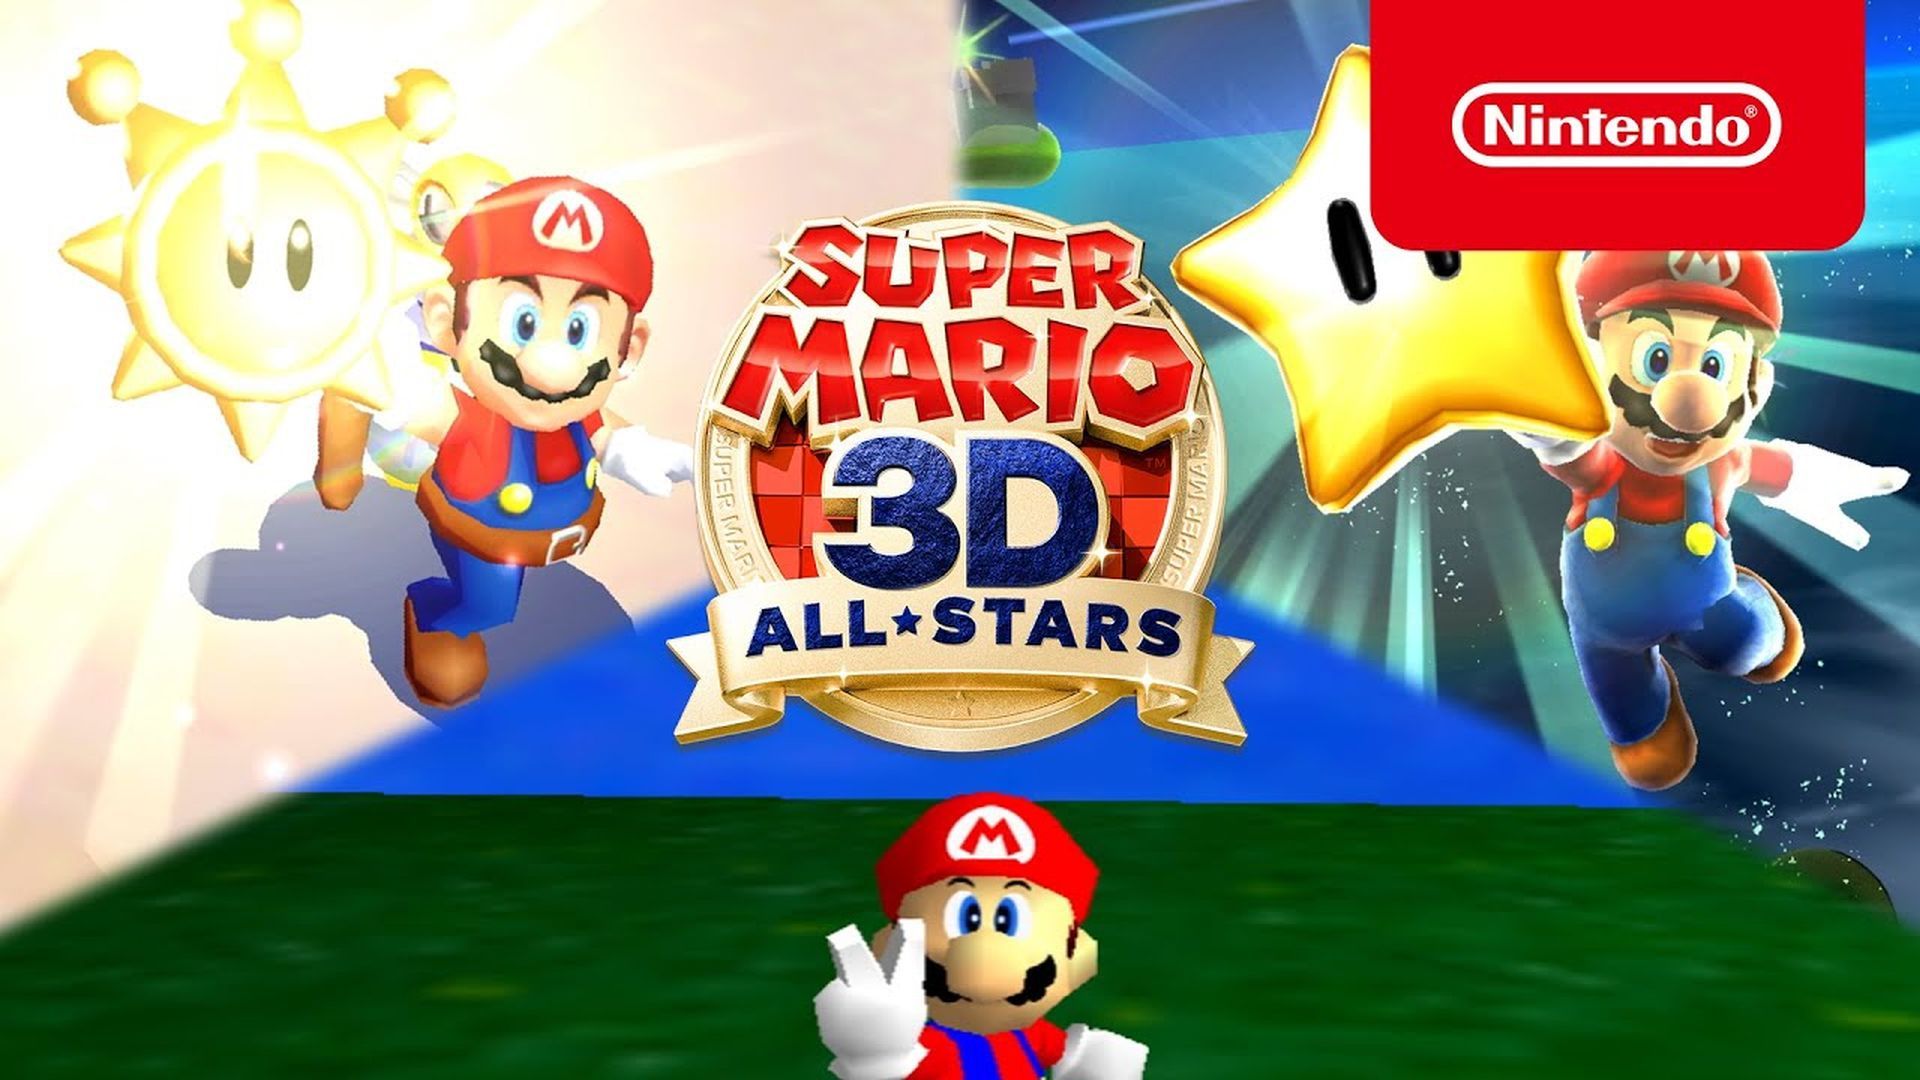 Super Mario 3D All Stars Announced, Out On September 18th For Switch